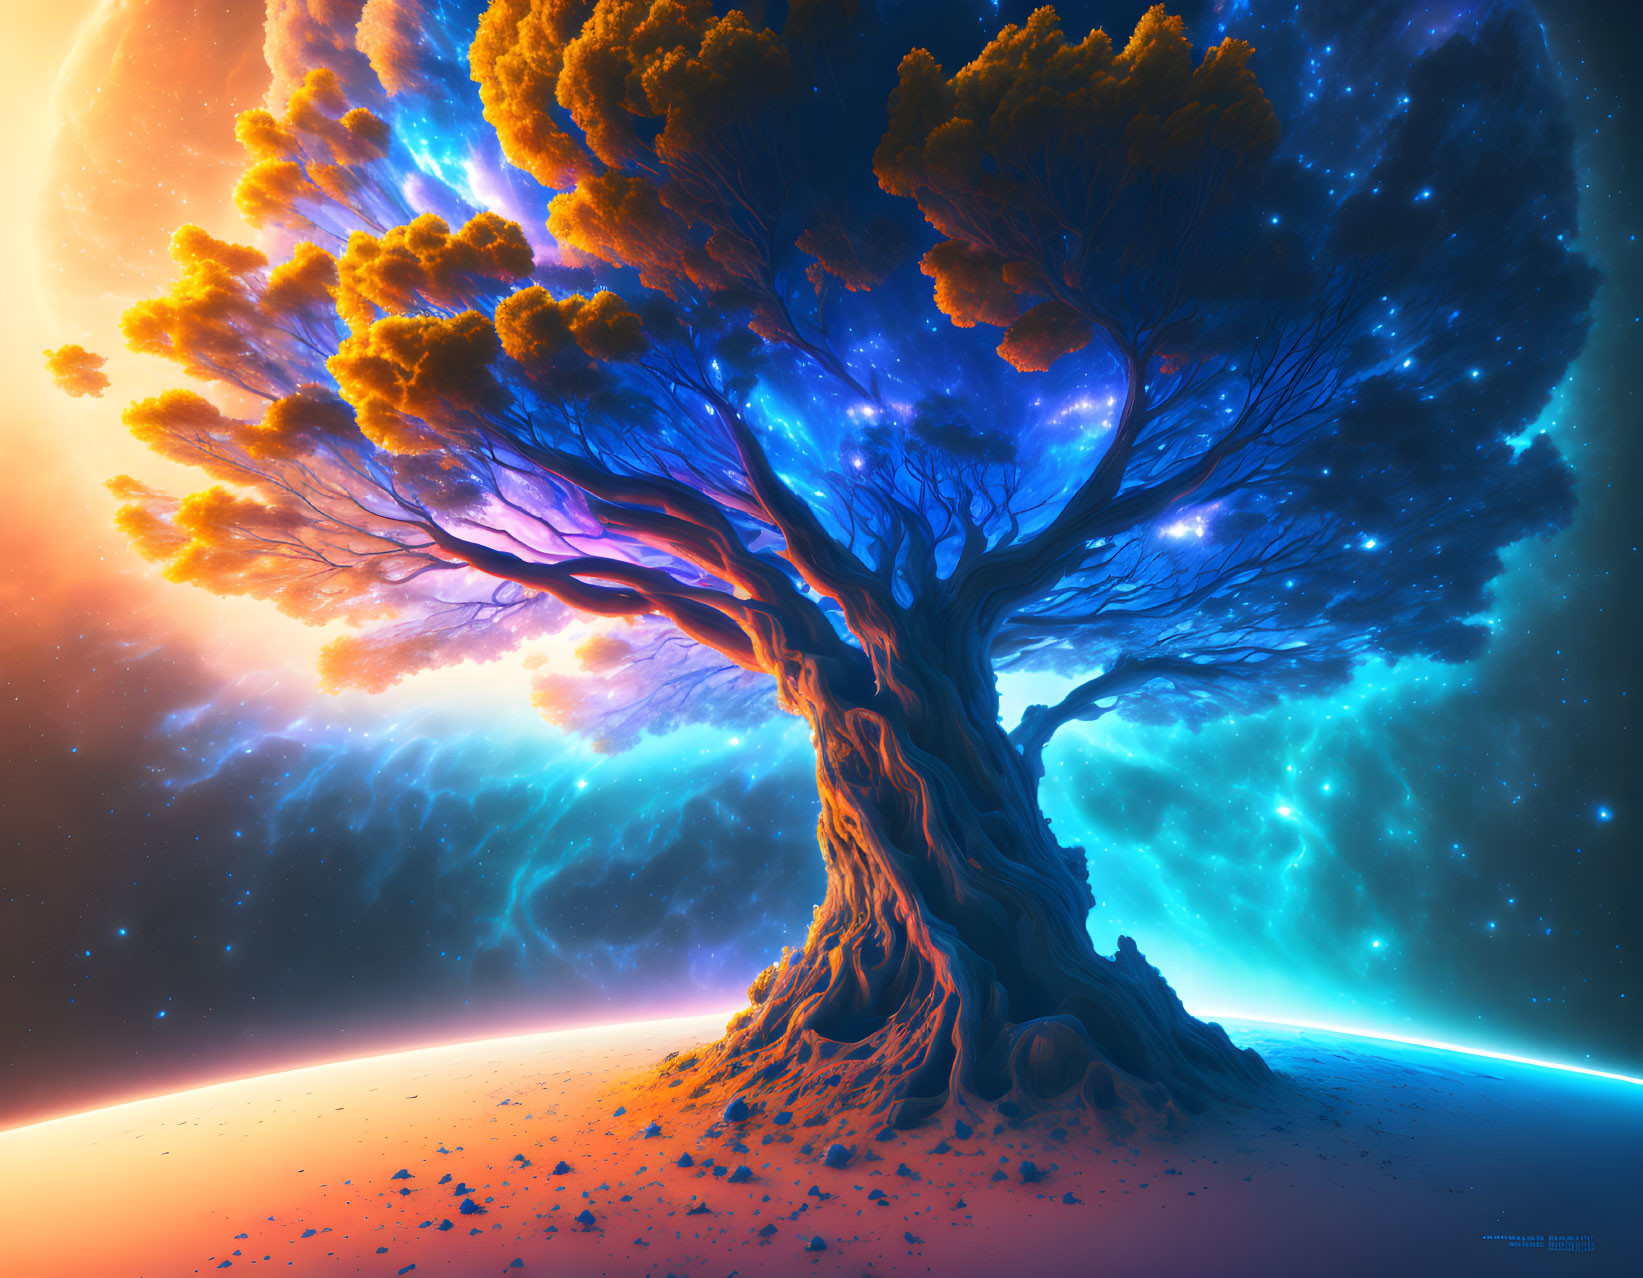 Colorful digital artwork: Cosmic tree with blue and orange canopy against starry backdrop